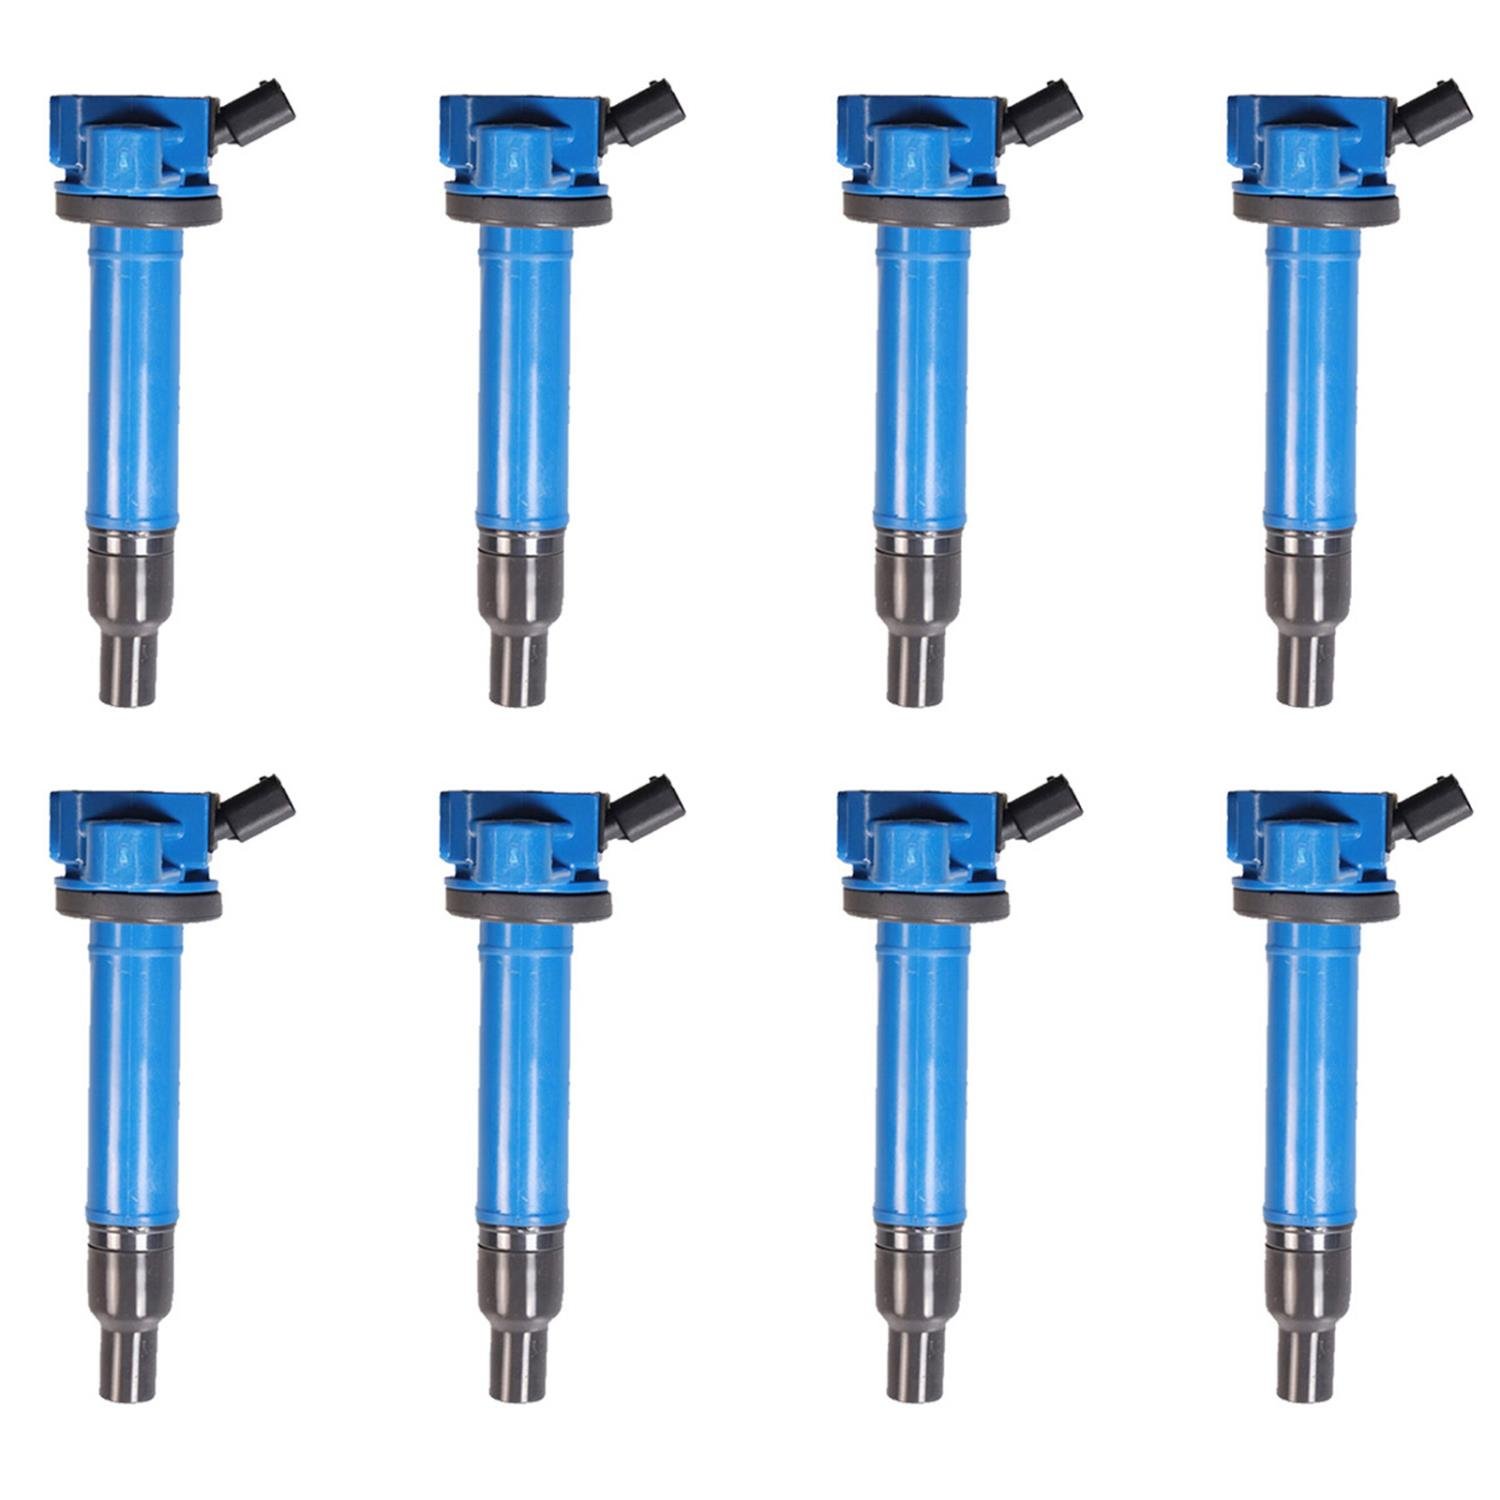 High-Performance Ignition Coils for Toyota Tundra/4-Runner [Blue]